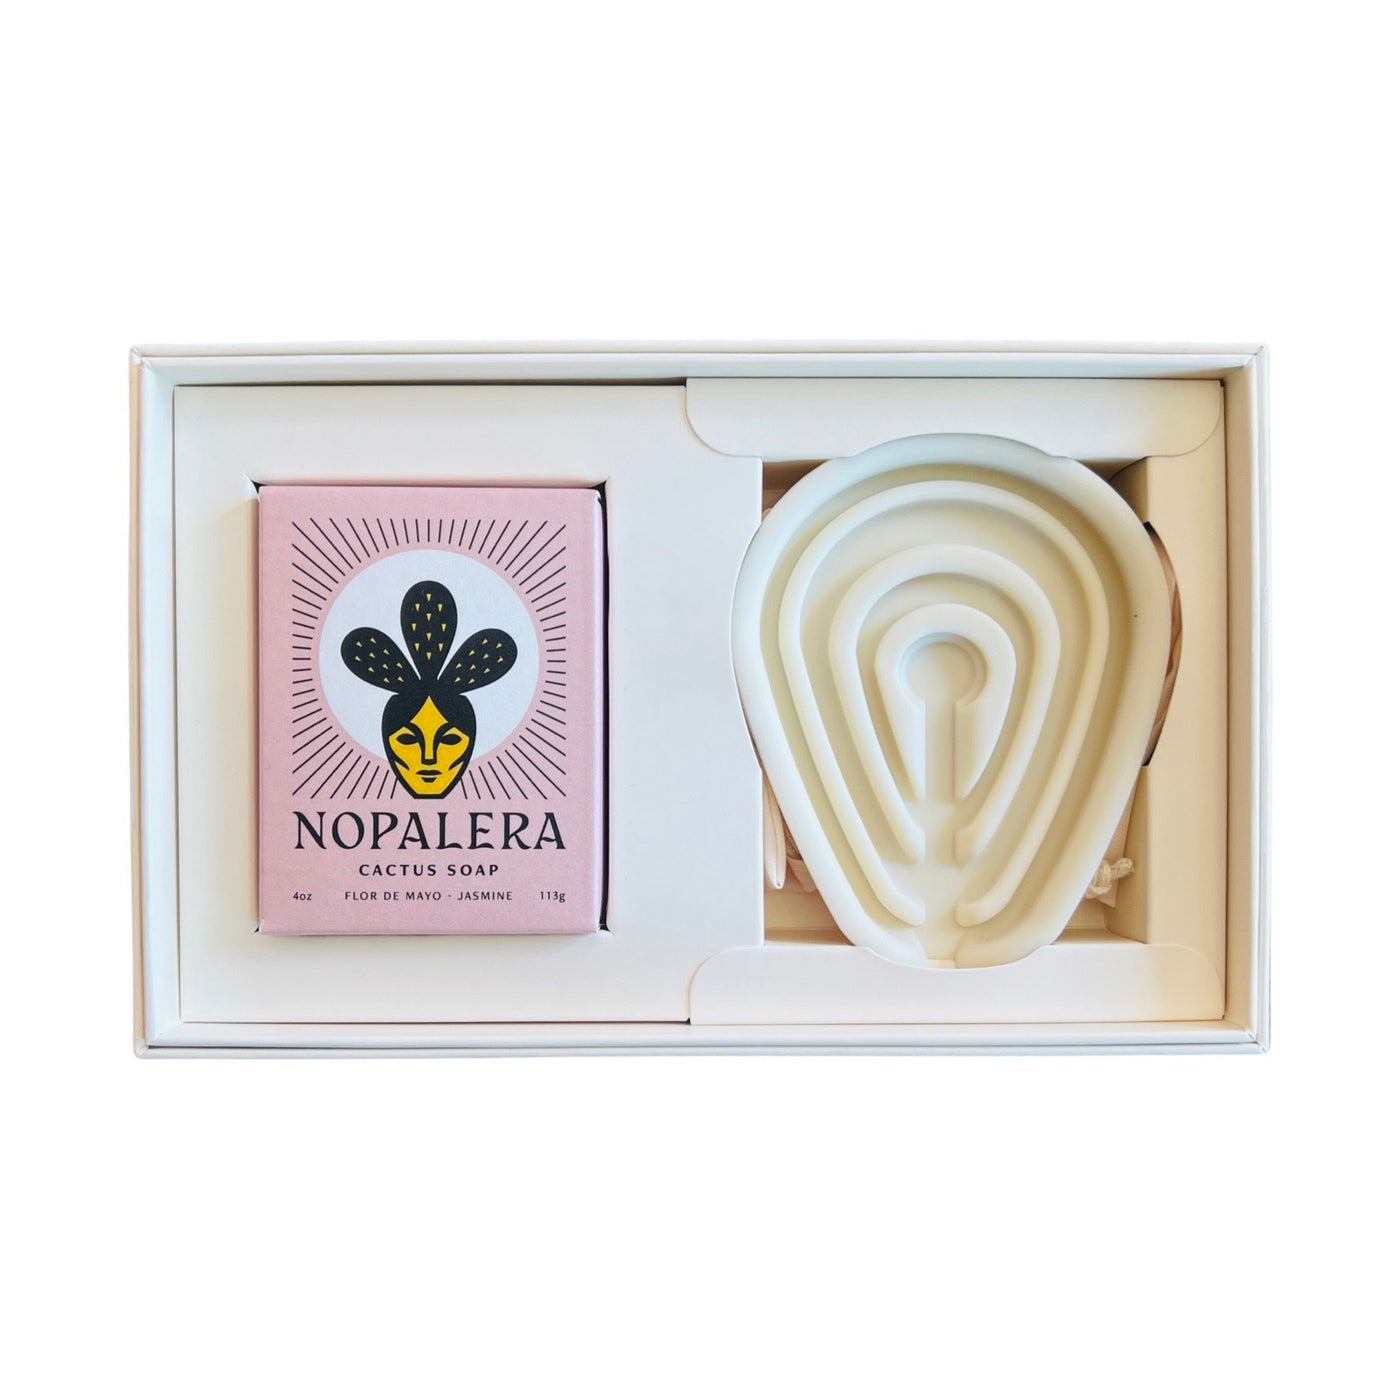 Nopalera soap and soap tray gift set in branded packaging